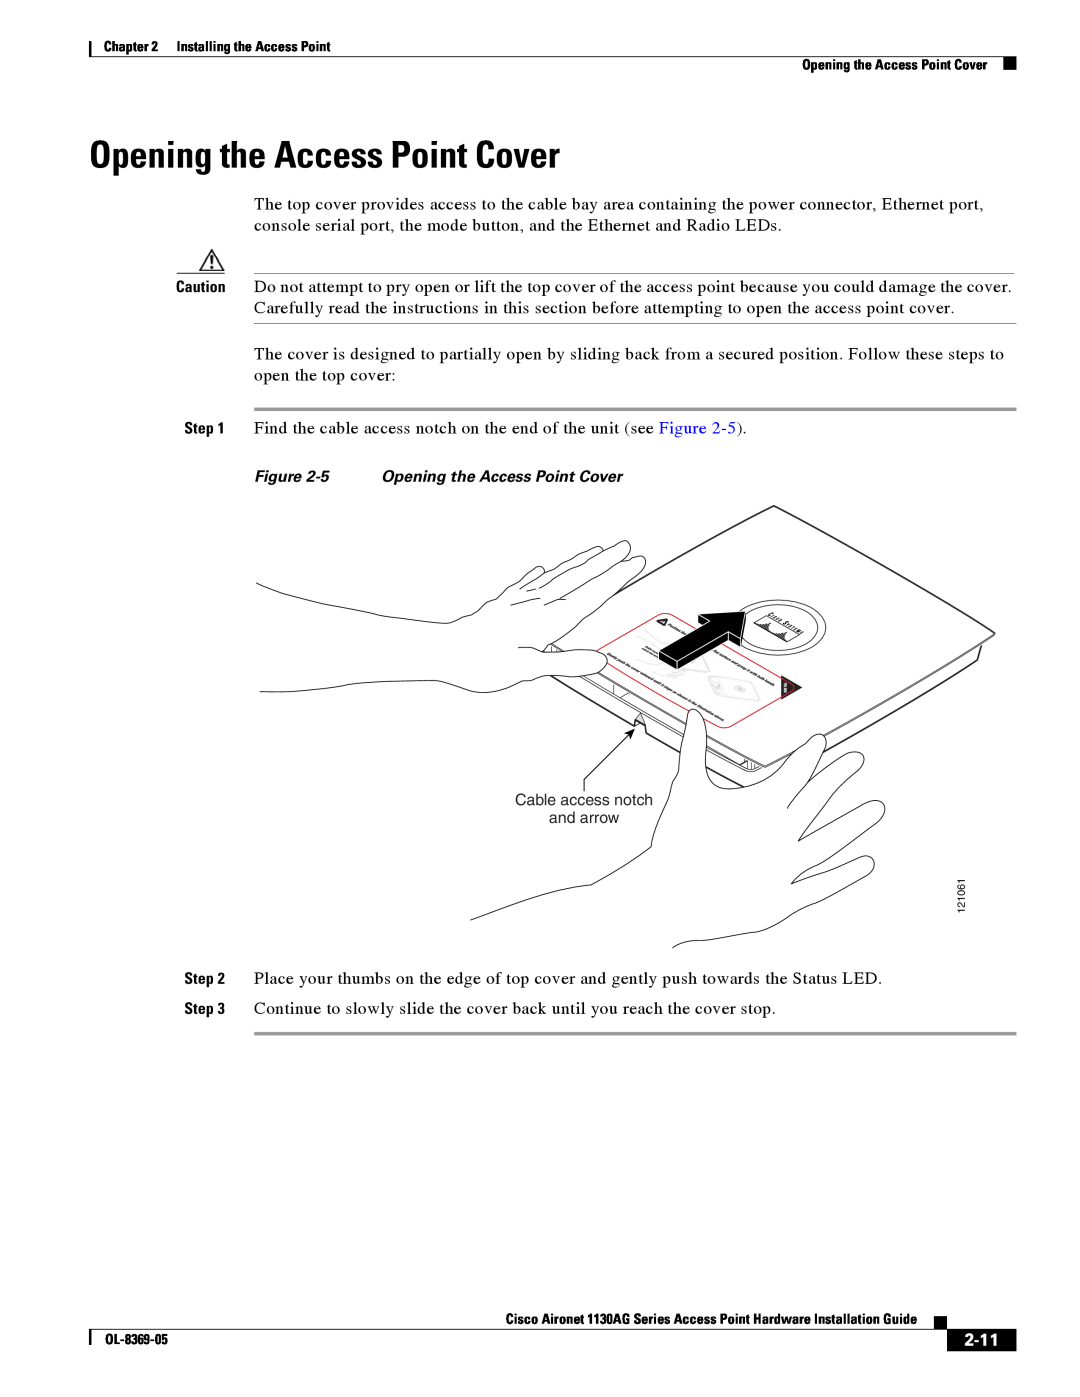 Cisco Systems 1130AG manual Opening the Access Point Cover, 2-11 